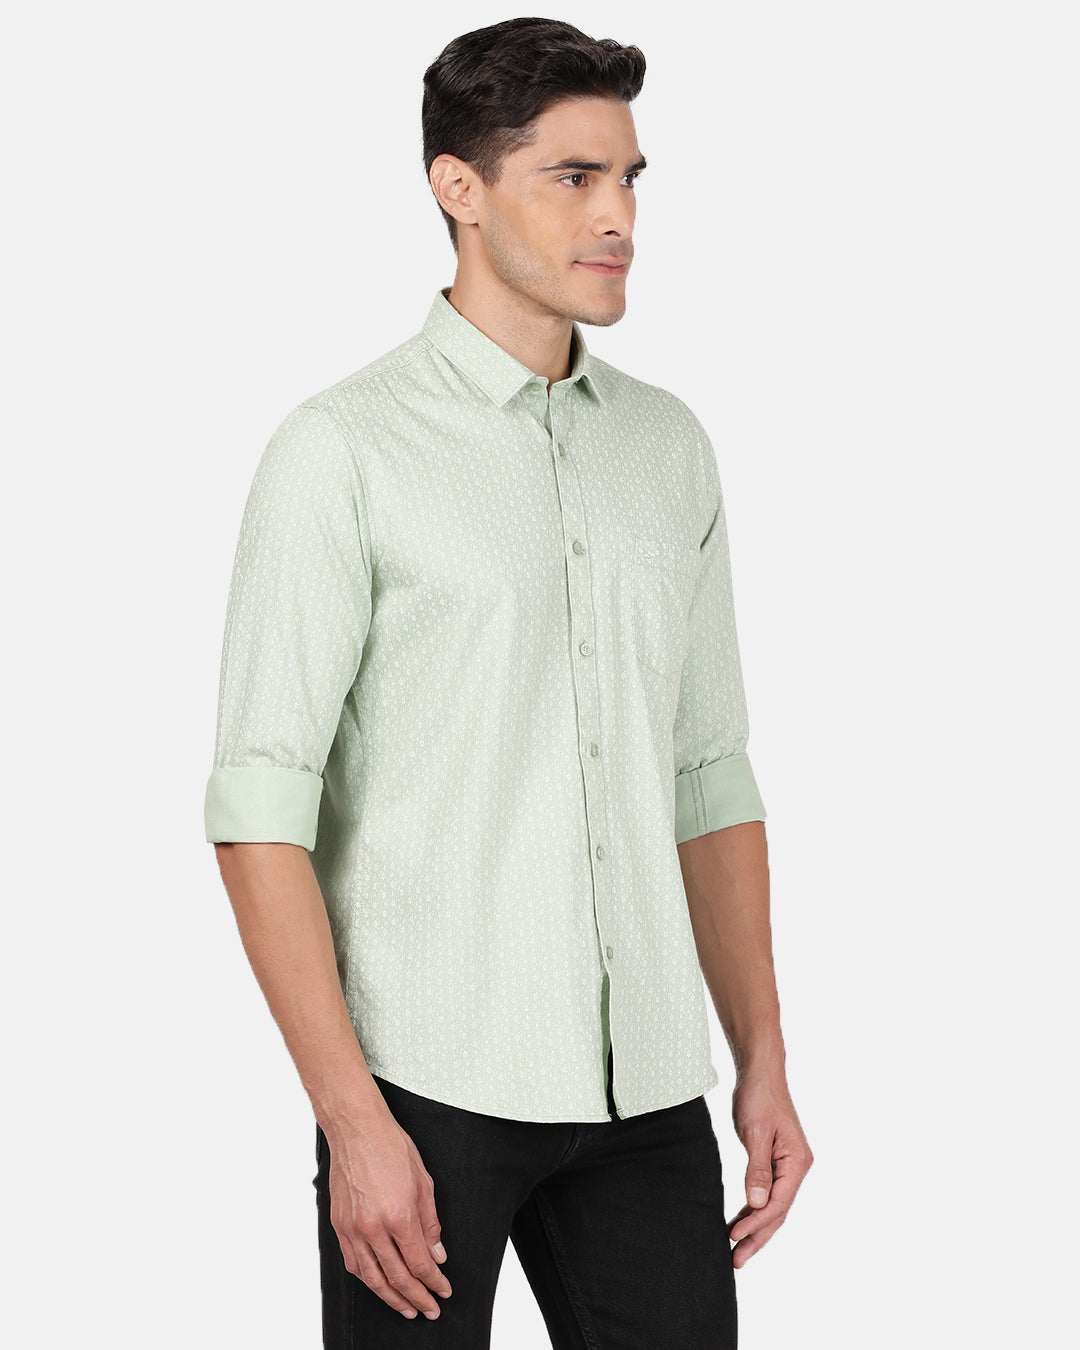 Crocodile Men's Casual Full Sleeve Slim Fit Printed Green with Collar Shirt